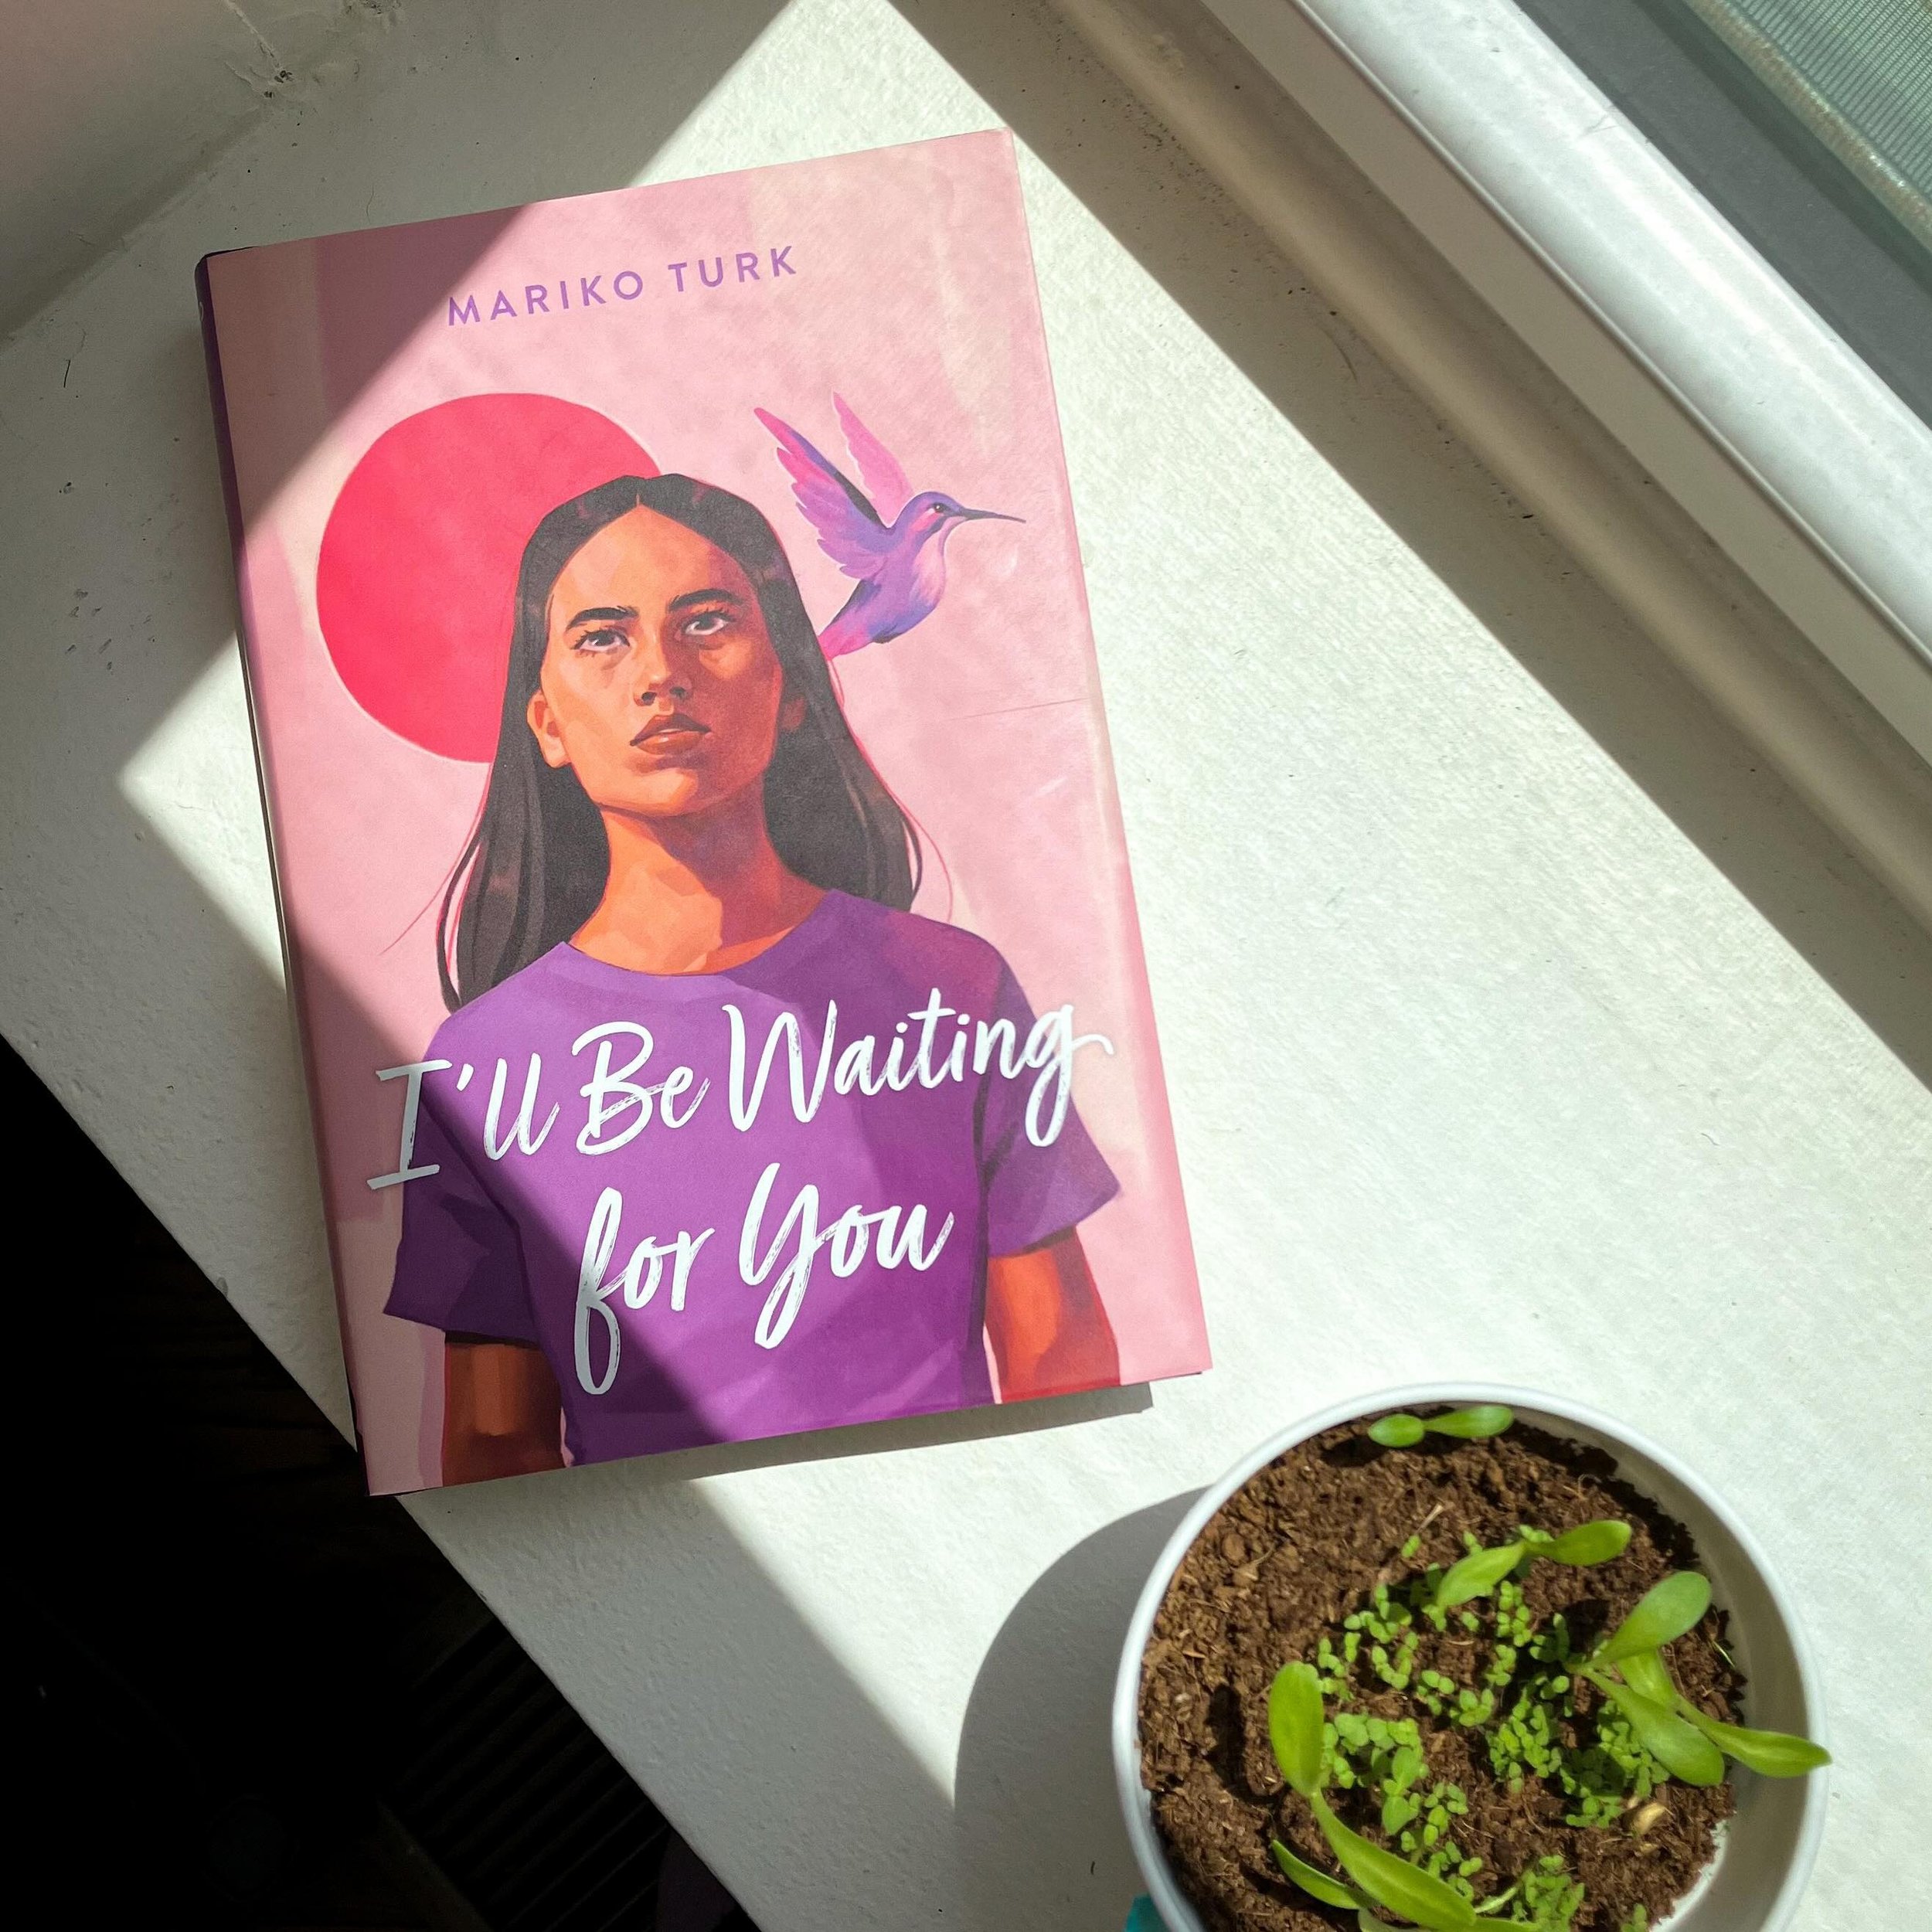 Belated congrats to @marikoturk for the release of I&rsquo;LL BE WAITING FOR YOU, which came out last week! 🎉🎉🎉

This one means a lot to me because I witnessed, as a fellow sophomore author and new mom (during a global pandemic, no less), its jour